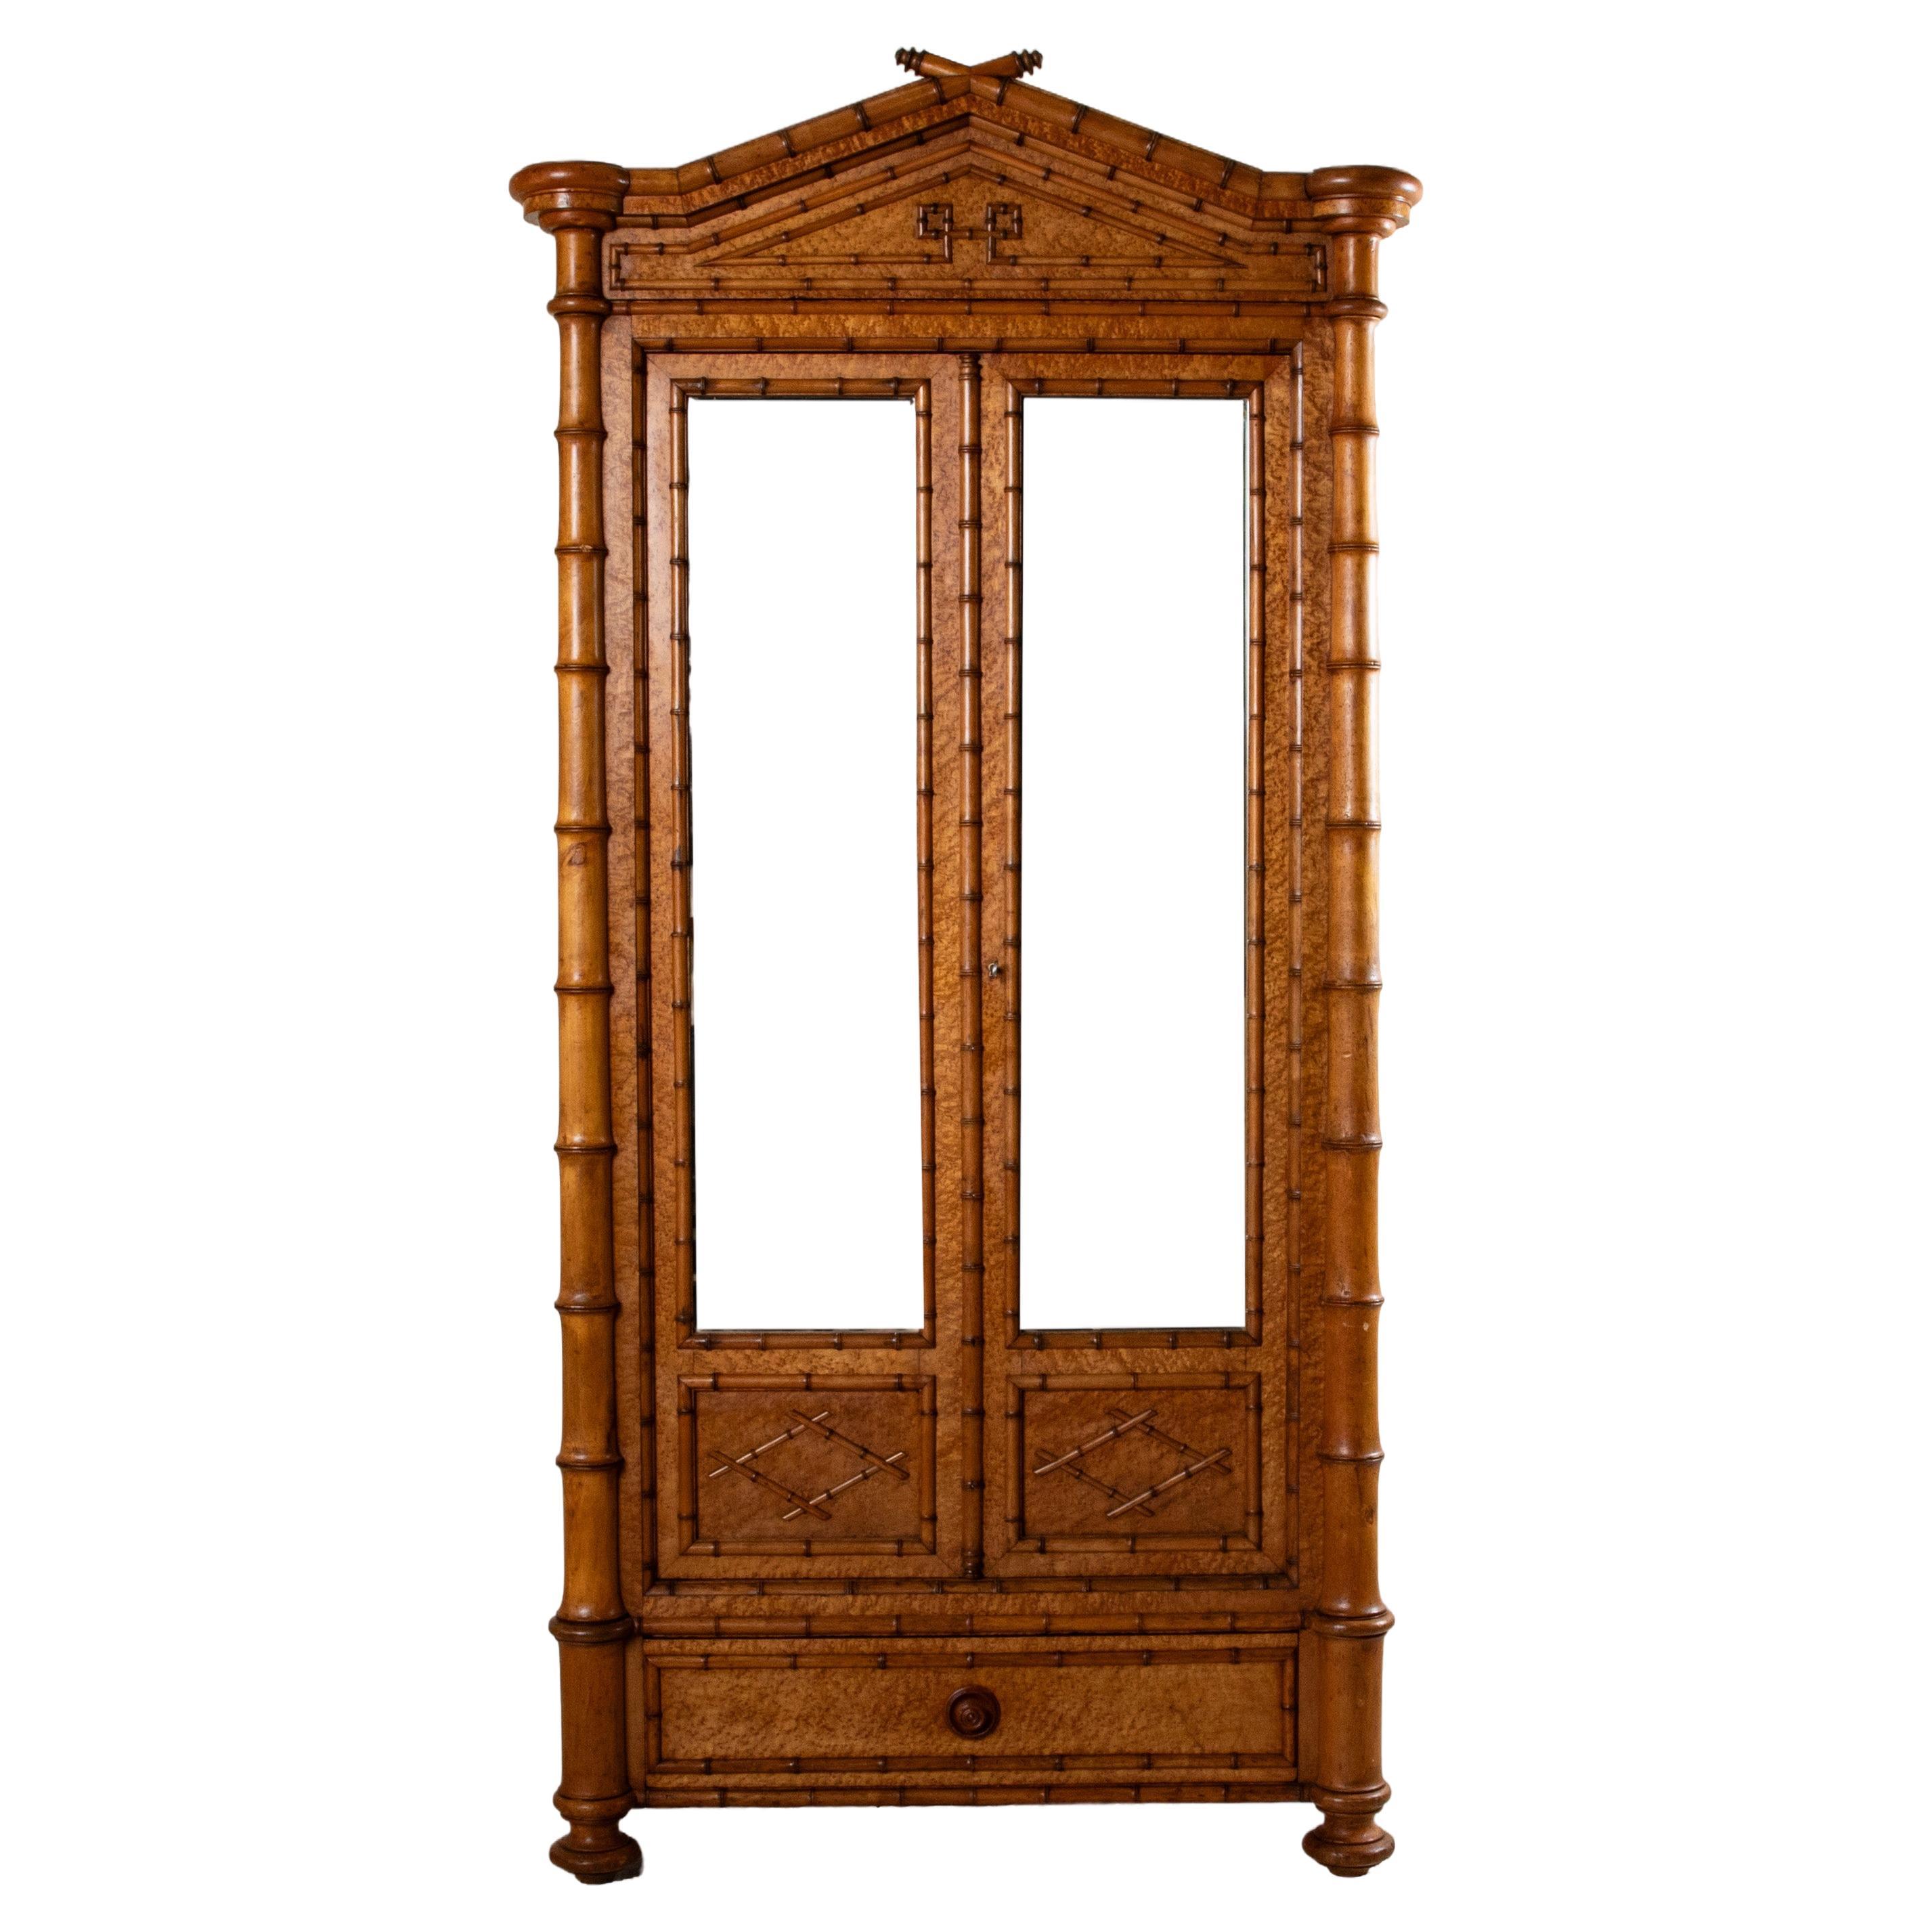 Early 20th Century French Faux Bamboo Armoire or Wardrobe with Mirrors, 96-in H